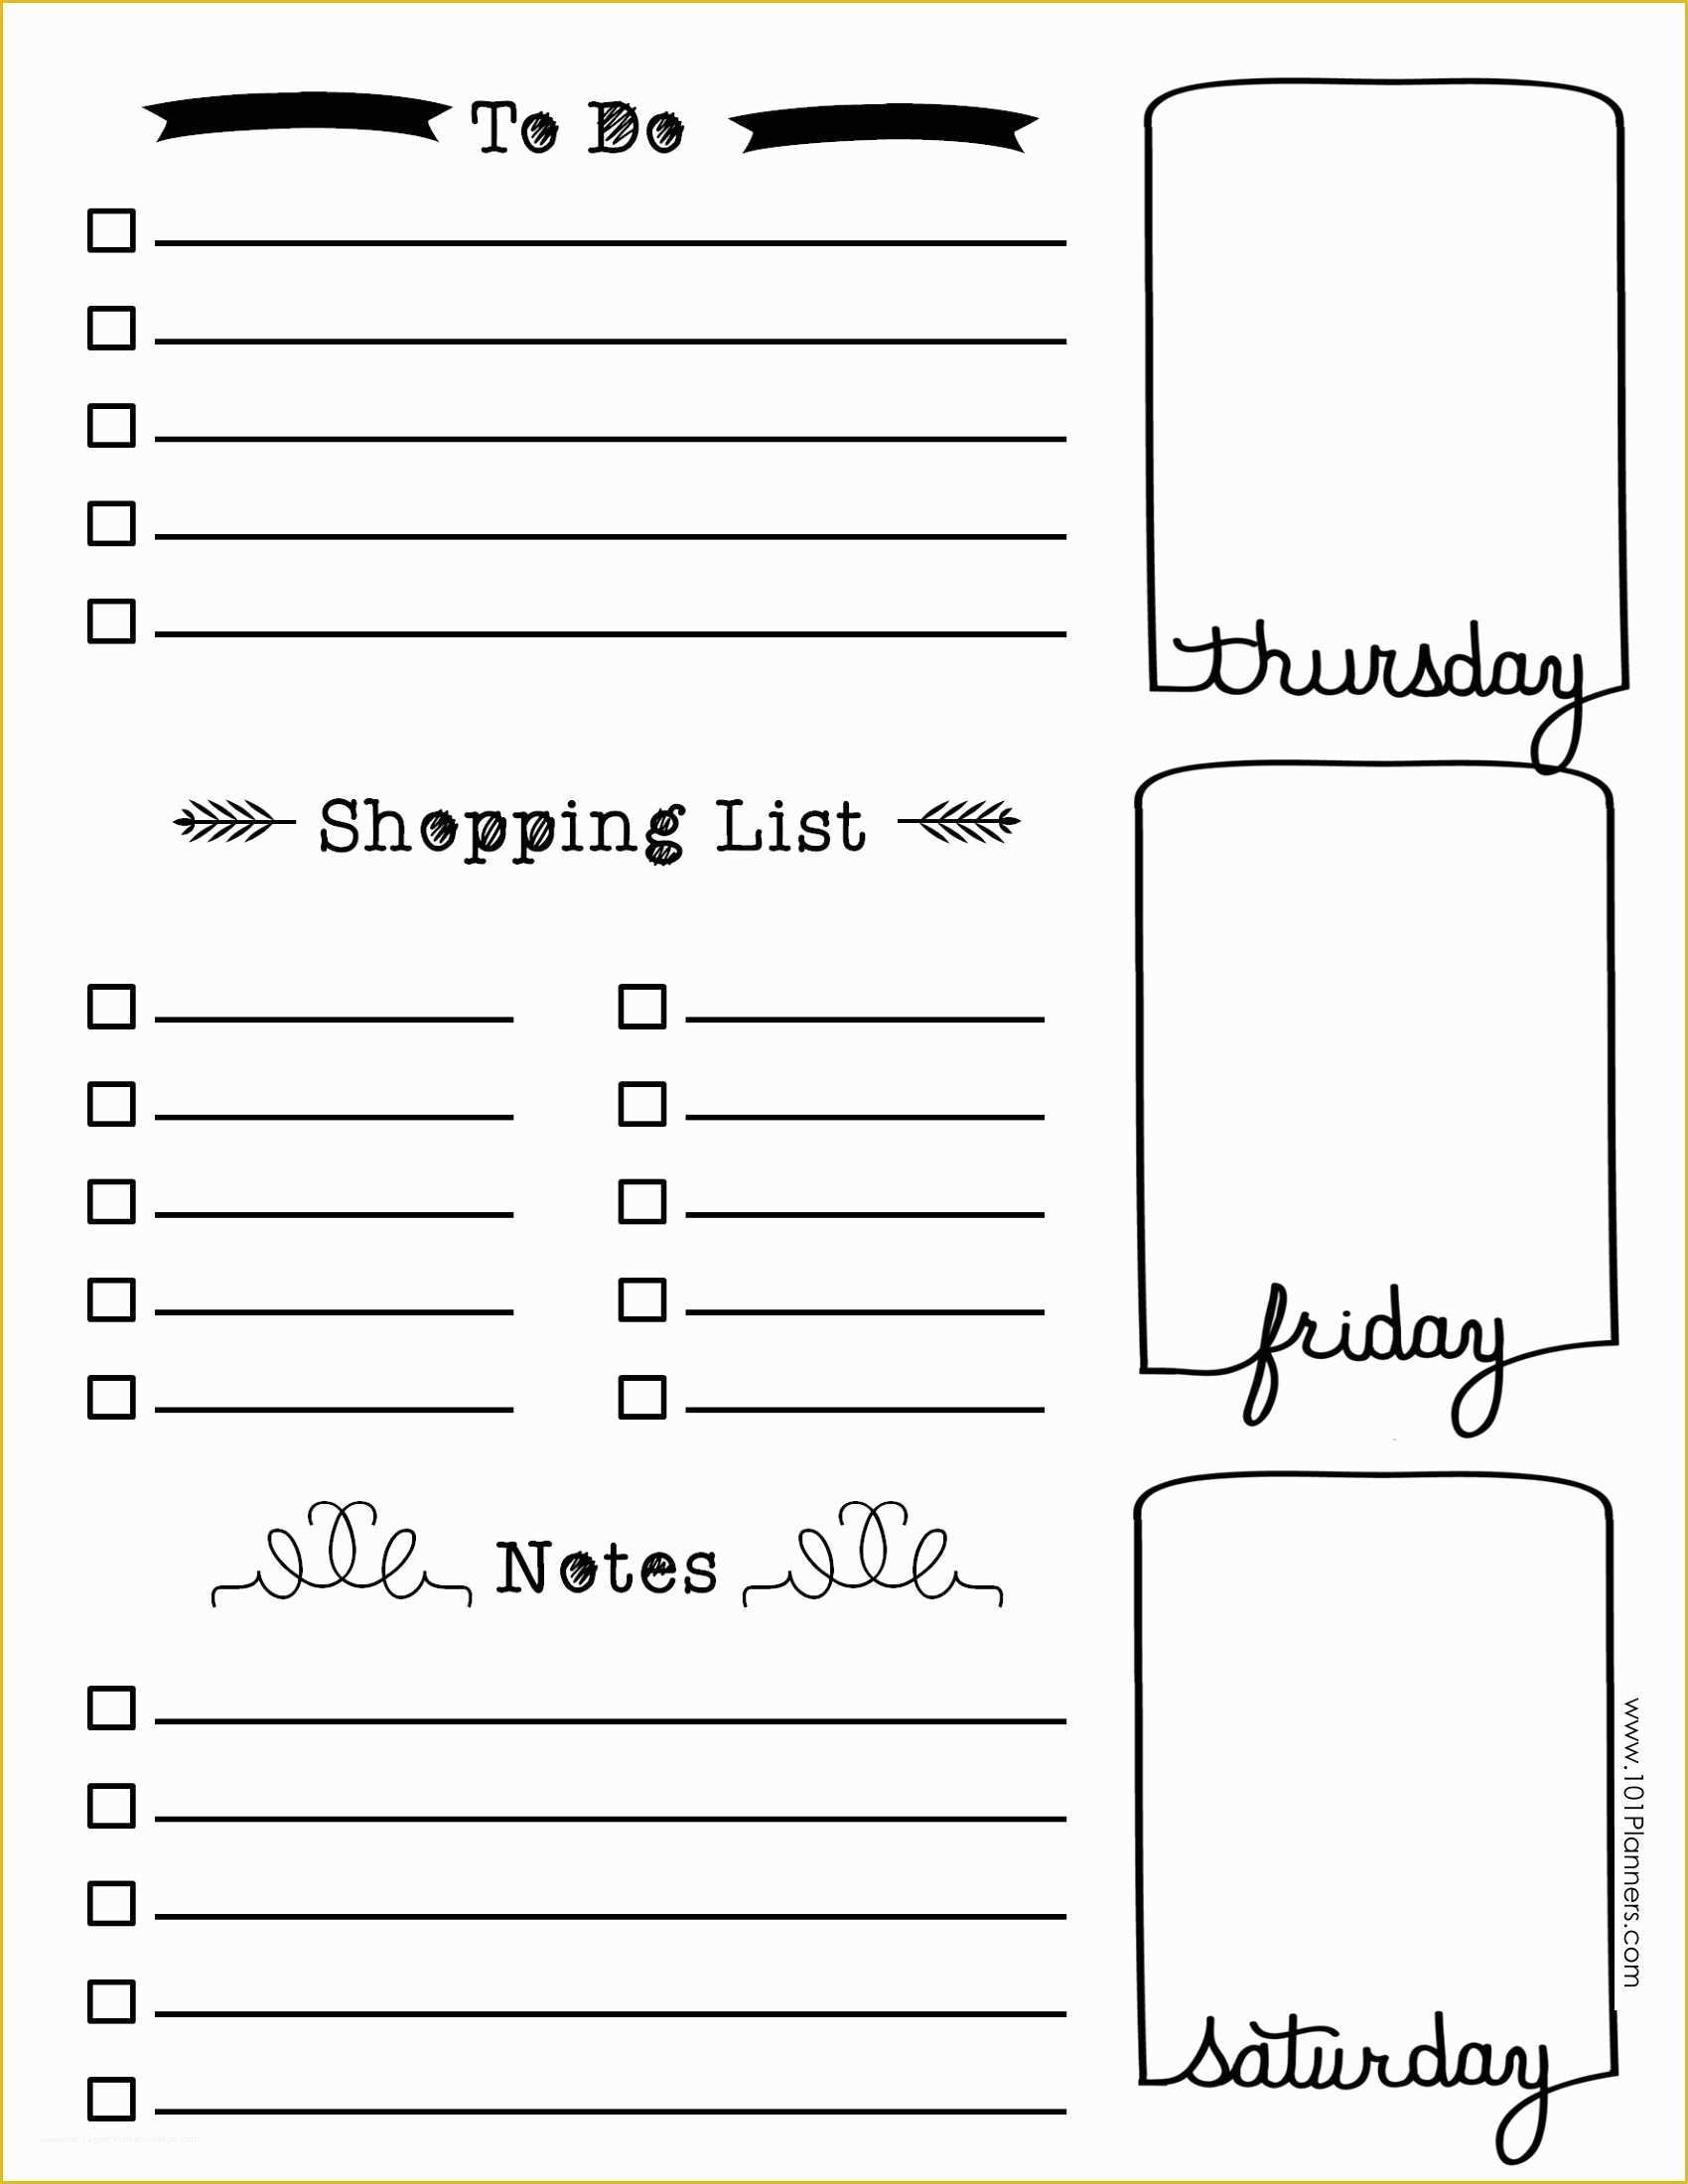 Free Bullet Journal Templates Of Image Result for Bullet Journal Templates